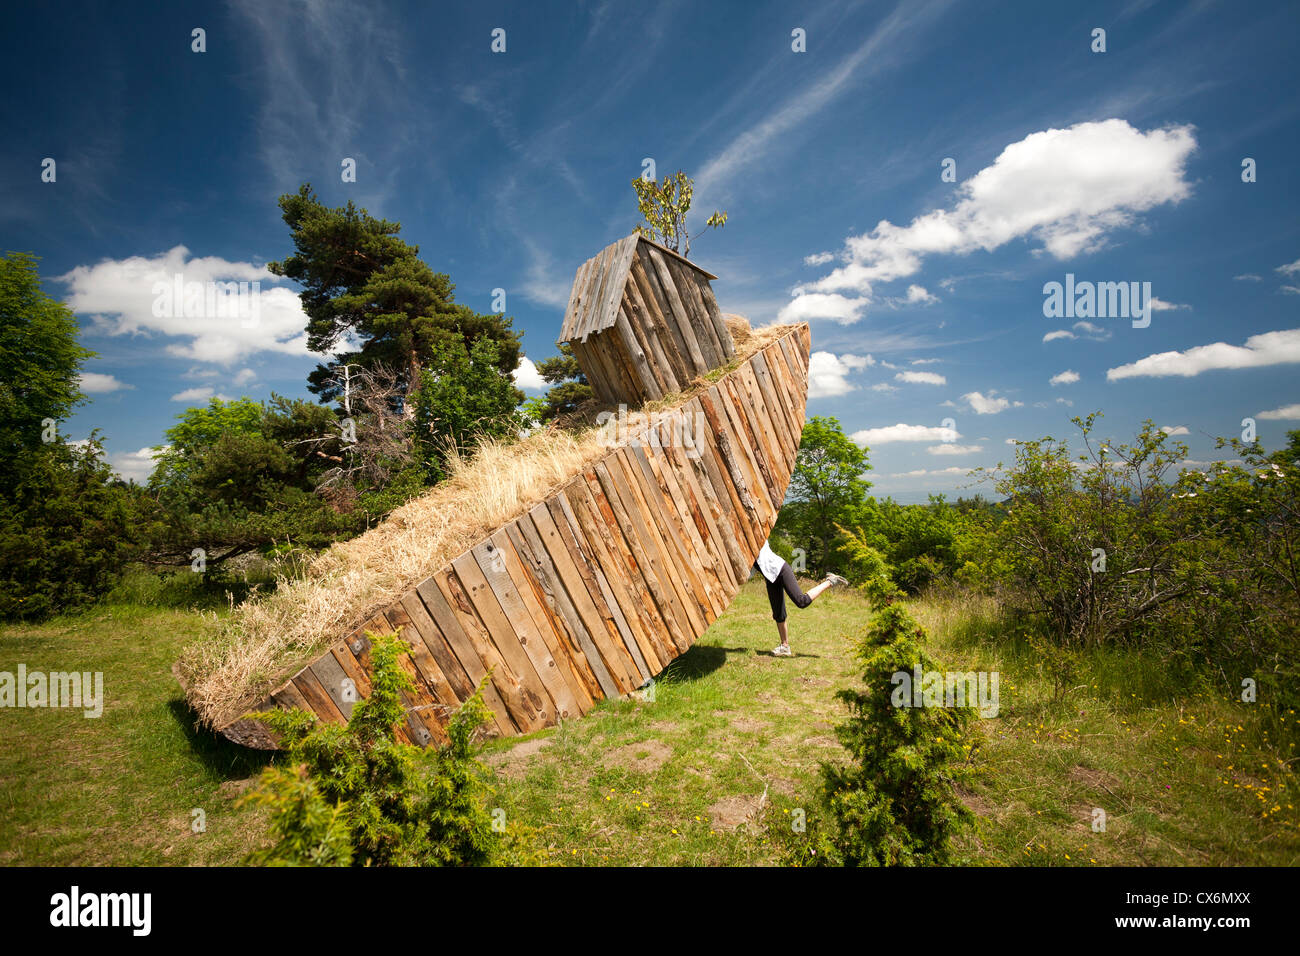 The Land Art work called 'Bascule', carried out by Marion ORFILA, the French visual artist. Stock Photo